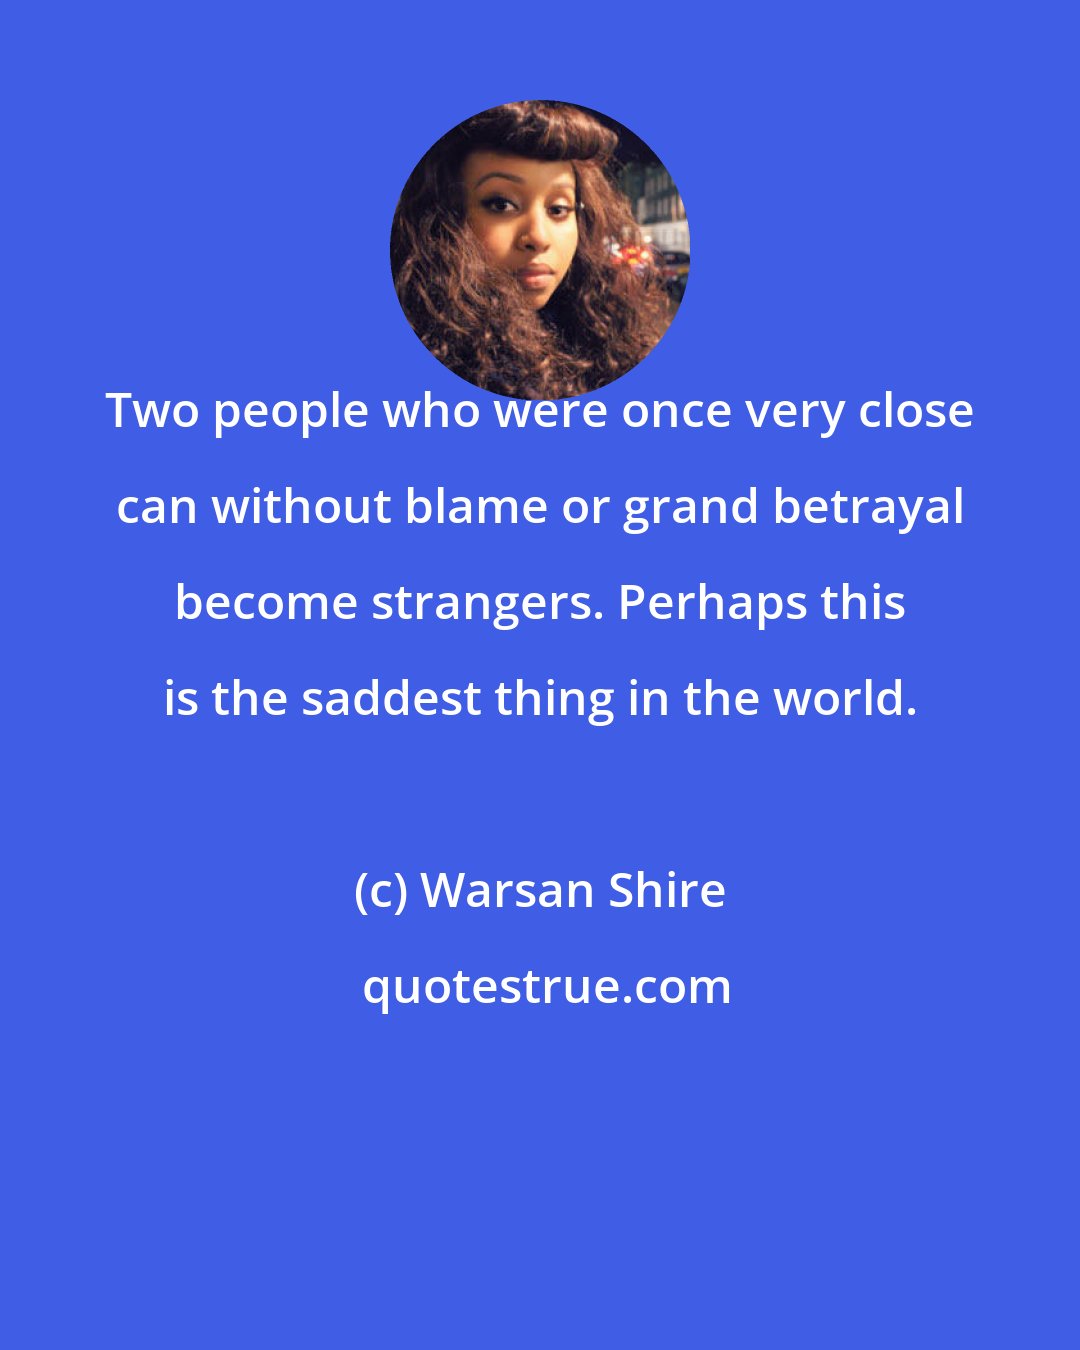 Warsan Shire: Two people who were once very close can without blame or grand betrayal become strangers. Perhaps this is the saddest thing in the world.